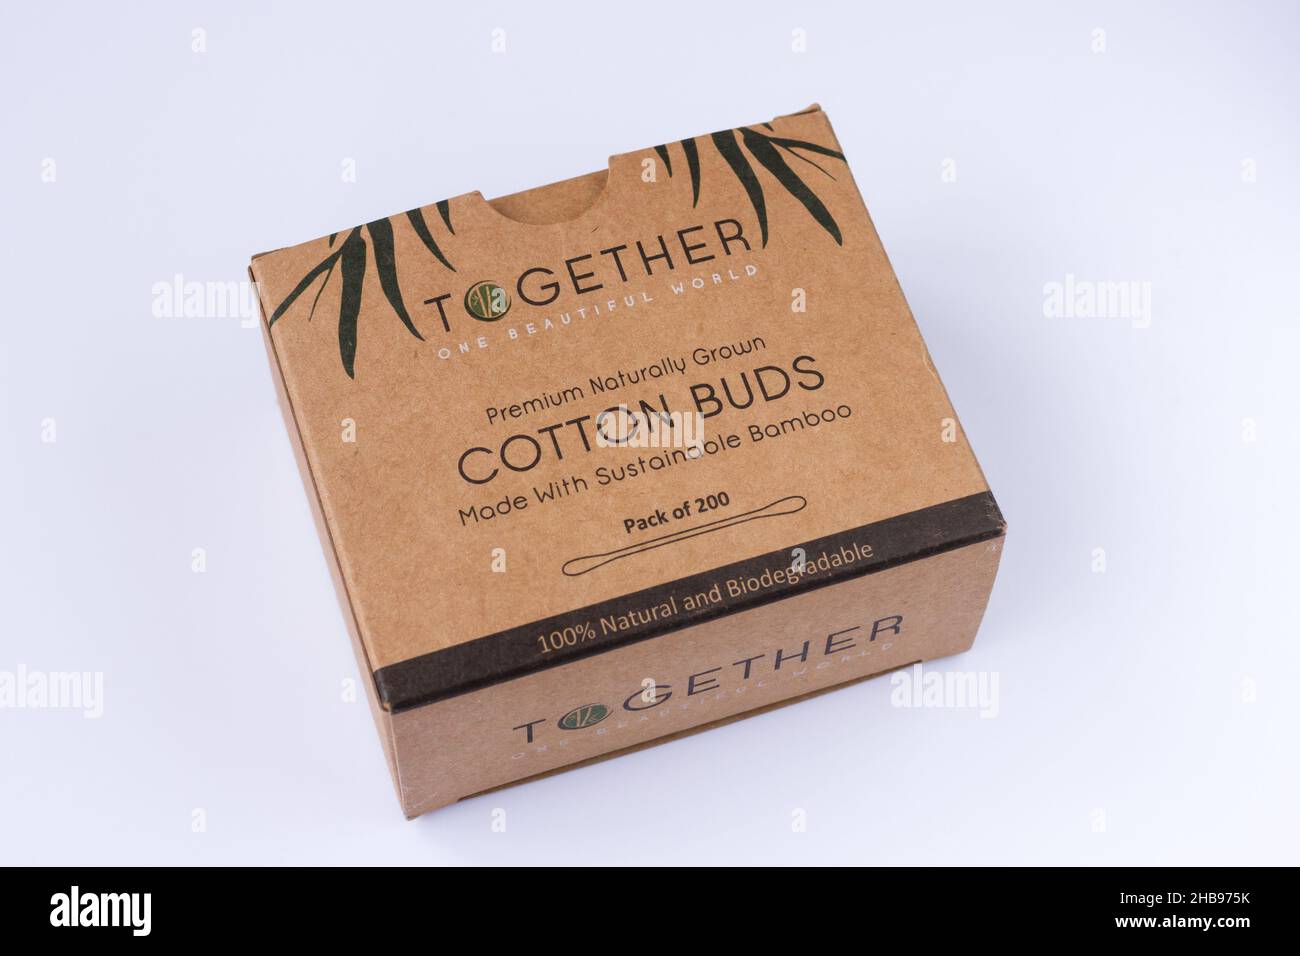 Eco friendly bamboo cotton buds in a brown box Stock Photo